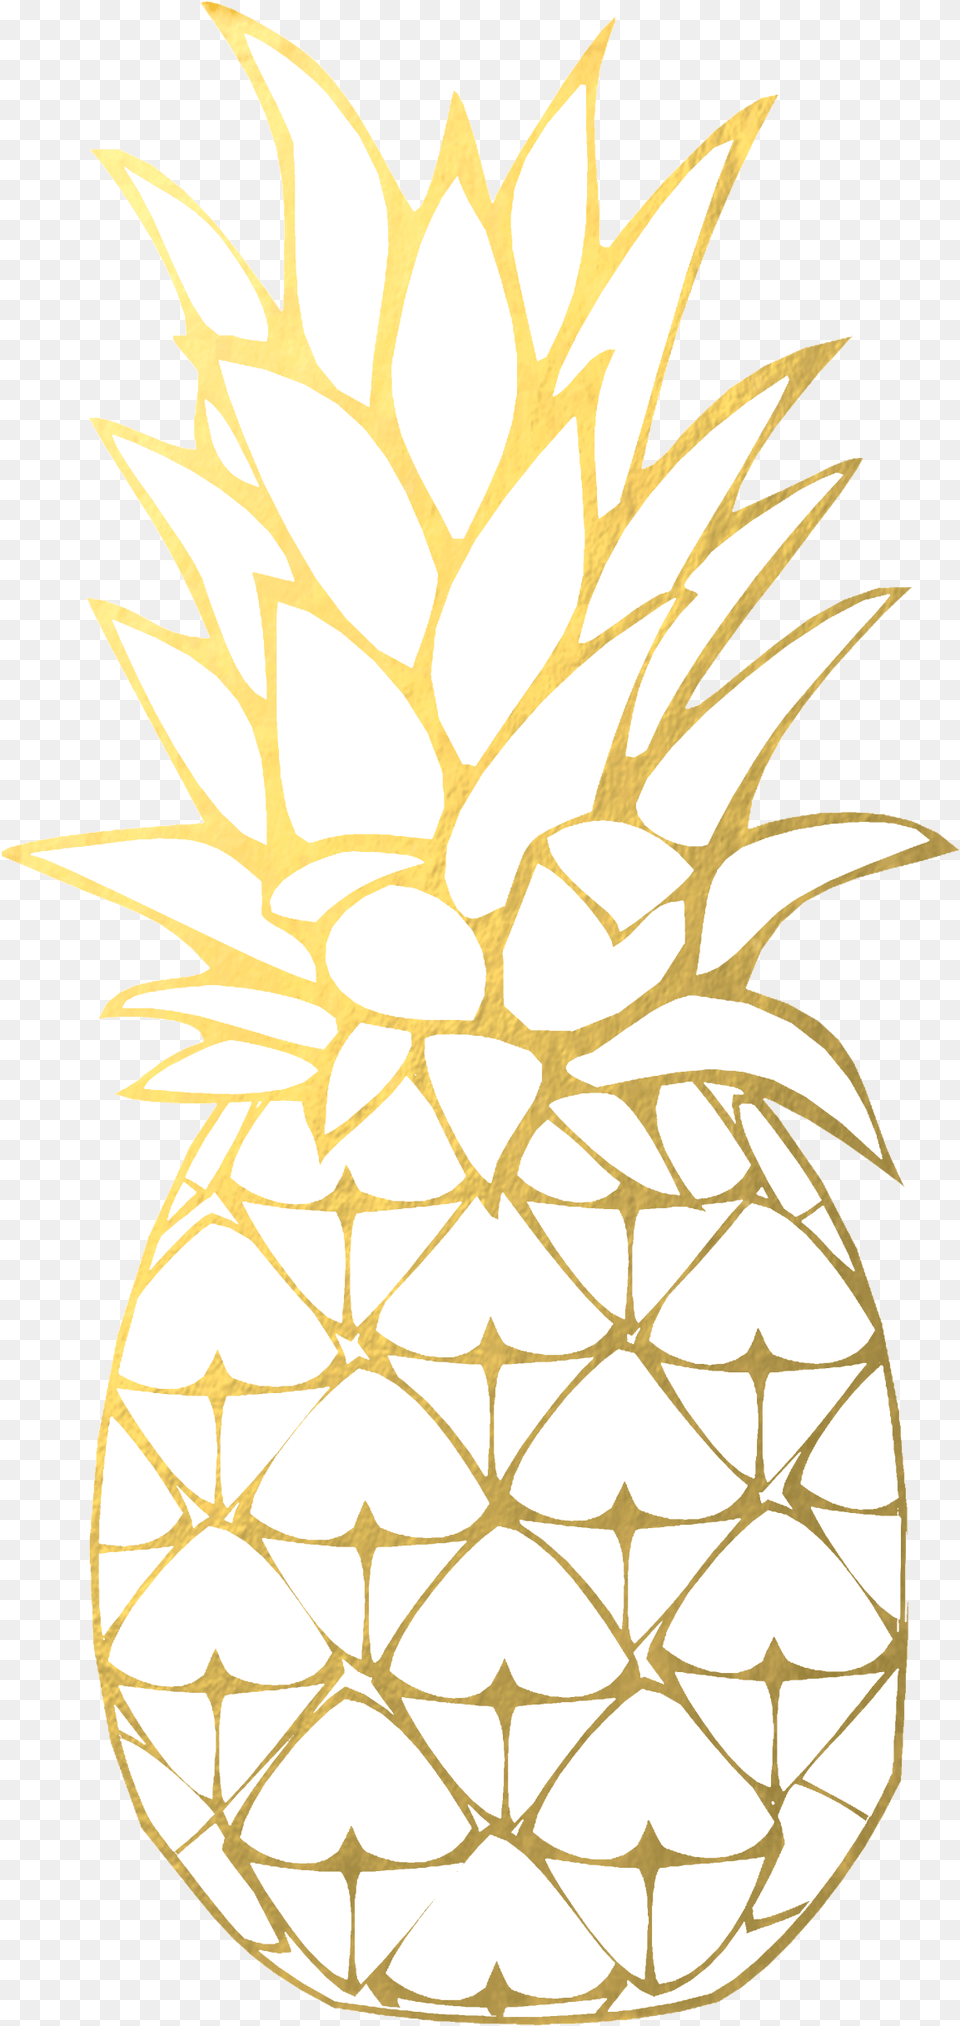 Pineapple Clipart Gold Pineapple Transparent Background Gold Pineapple, Food, Fruit, Plant, Produce Free Png Download